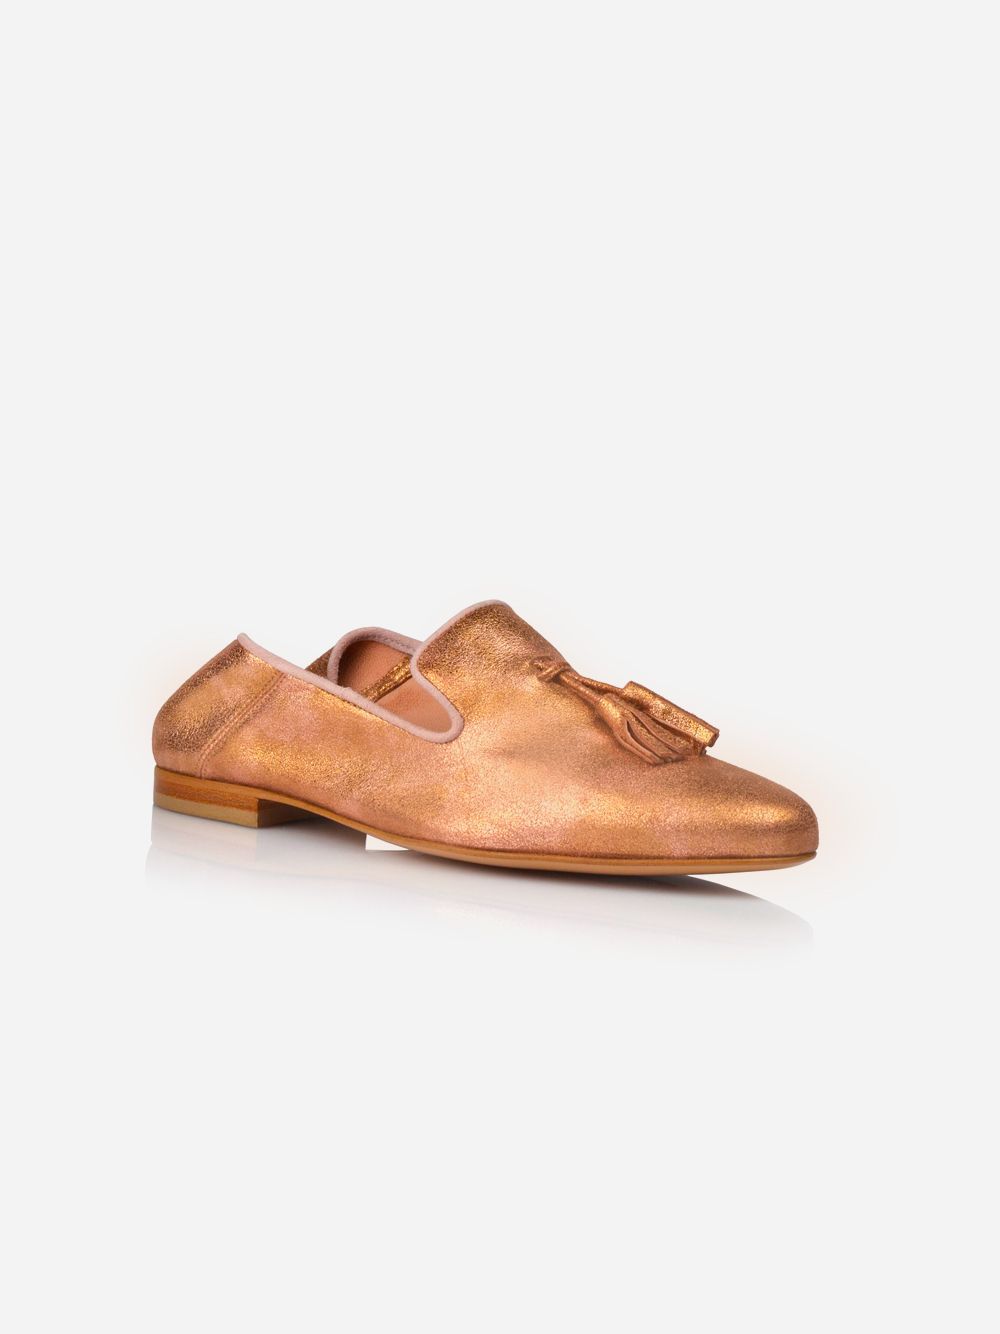 Open Gold Loafers | JJ Heitor